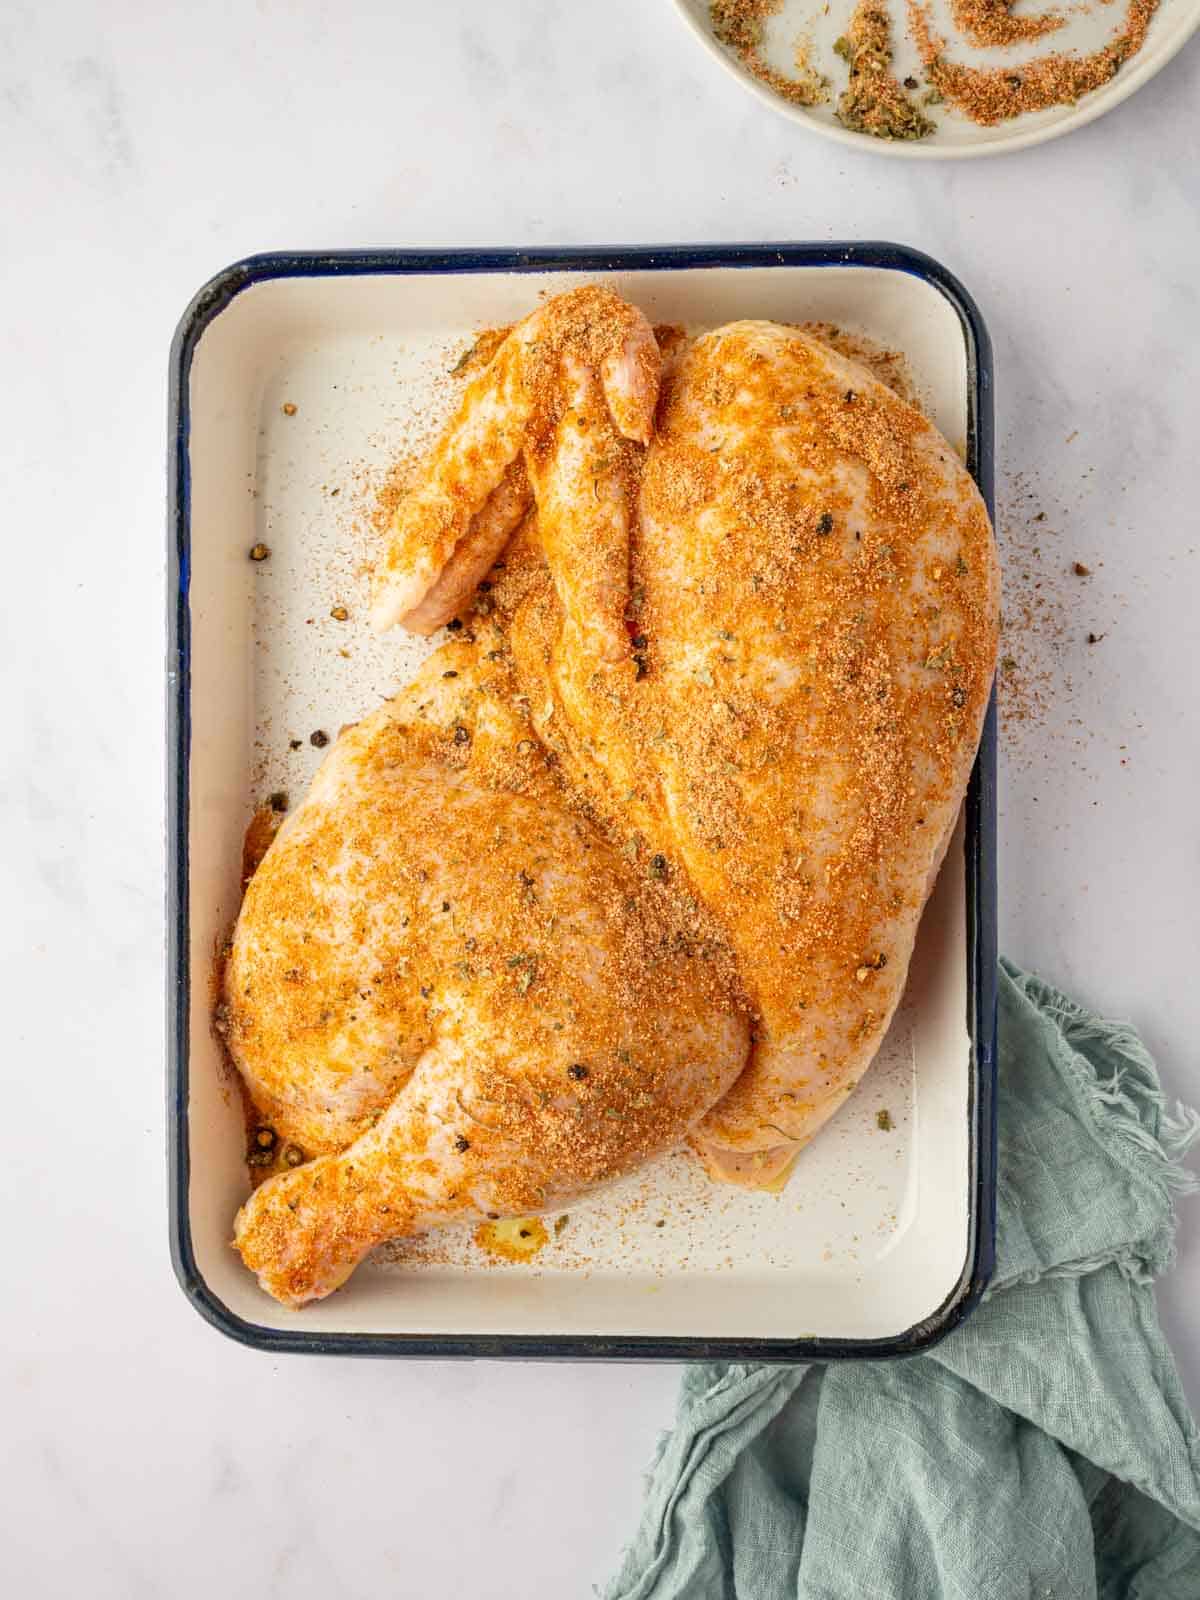 A half chicken is seasoned with herbs and spices.